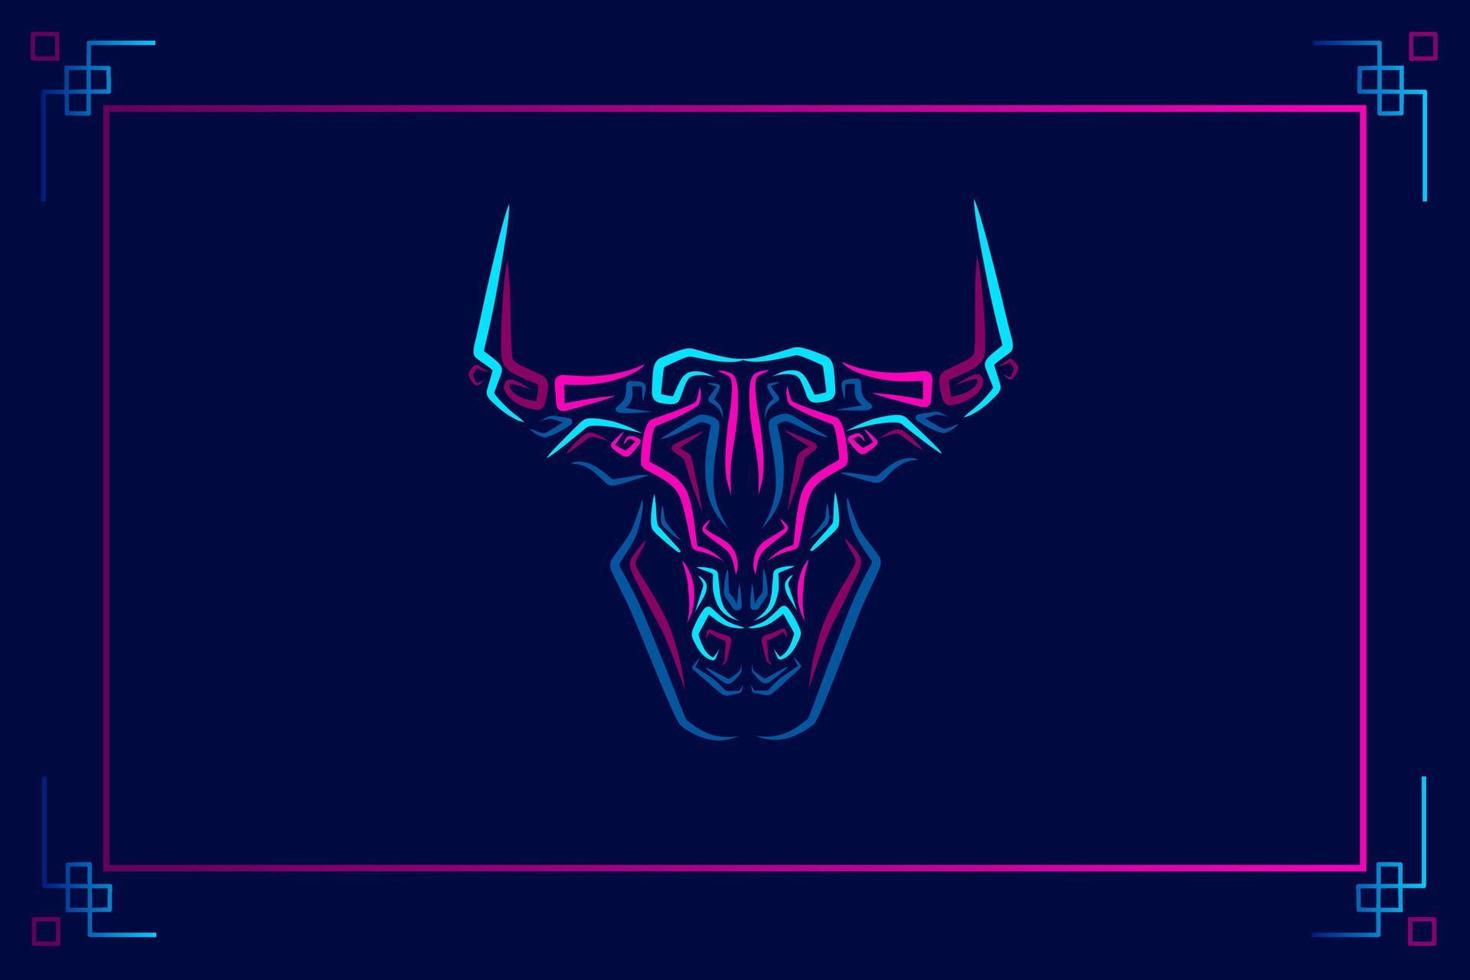 Bull cow ox logo neon line art colorful design with dark background. Abstract vector illustration.